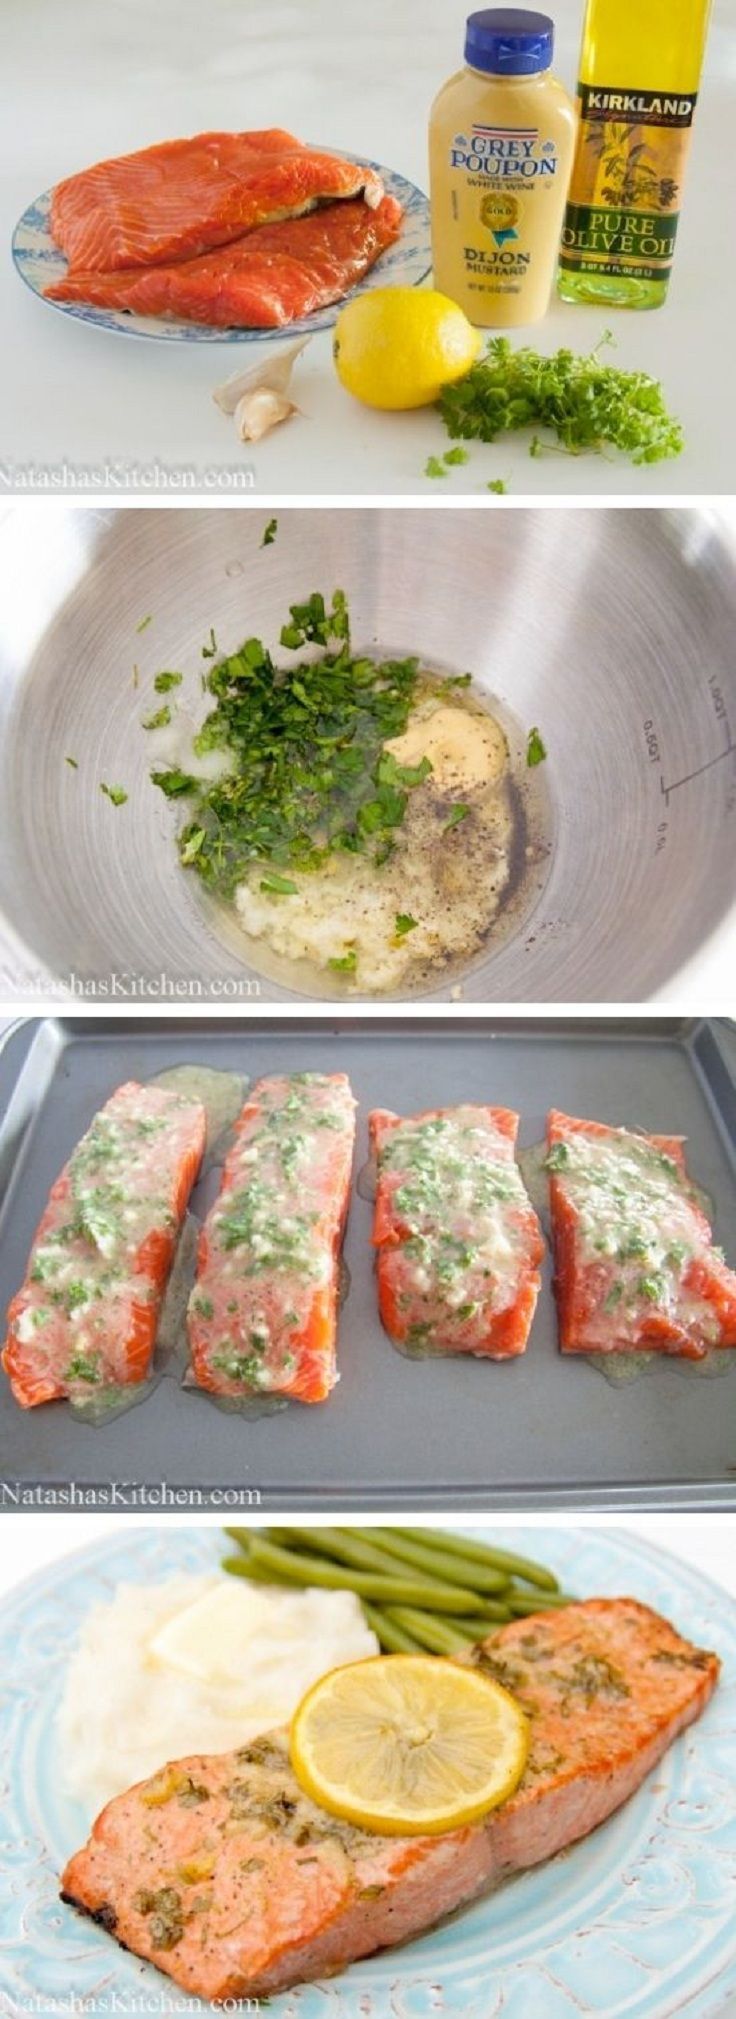 TOP 10 Salmon recipes. I love salmon, this is perfect!